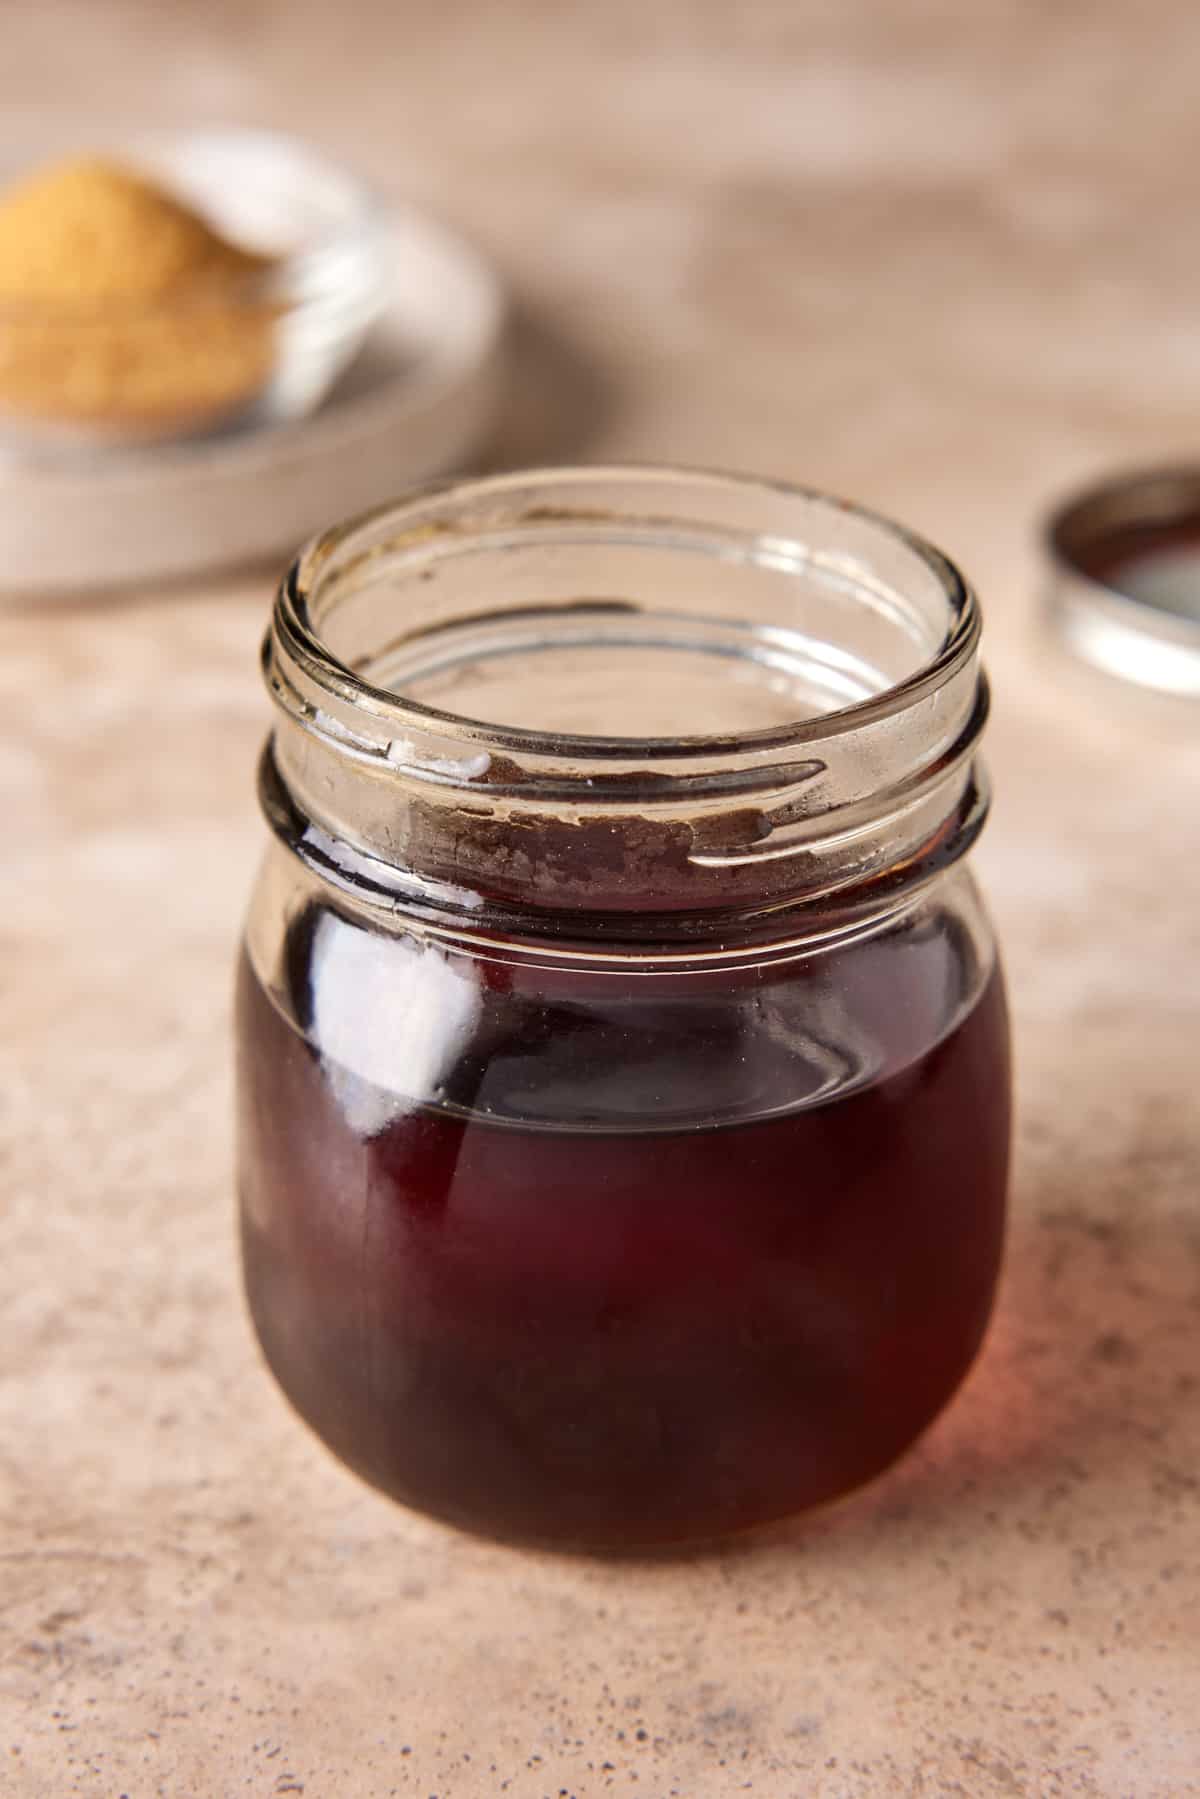 Cocktail syrup in a jar with sugar in the background.